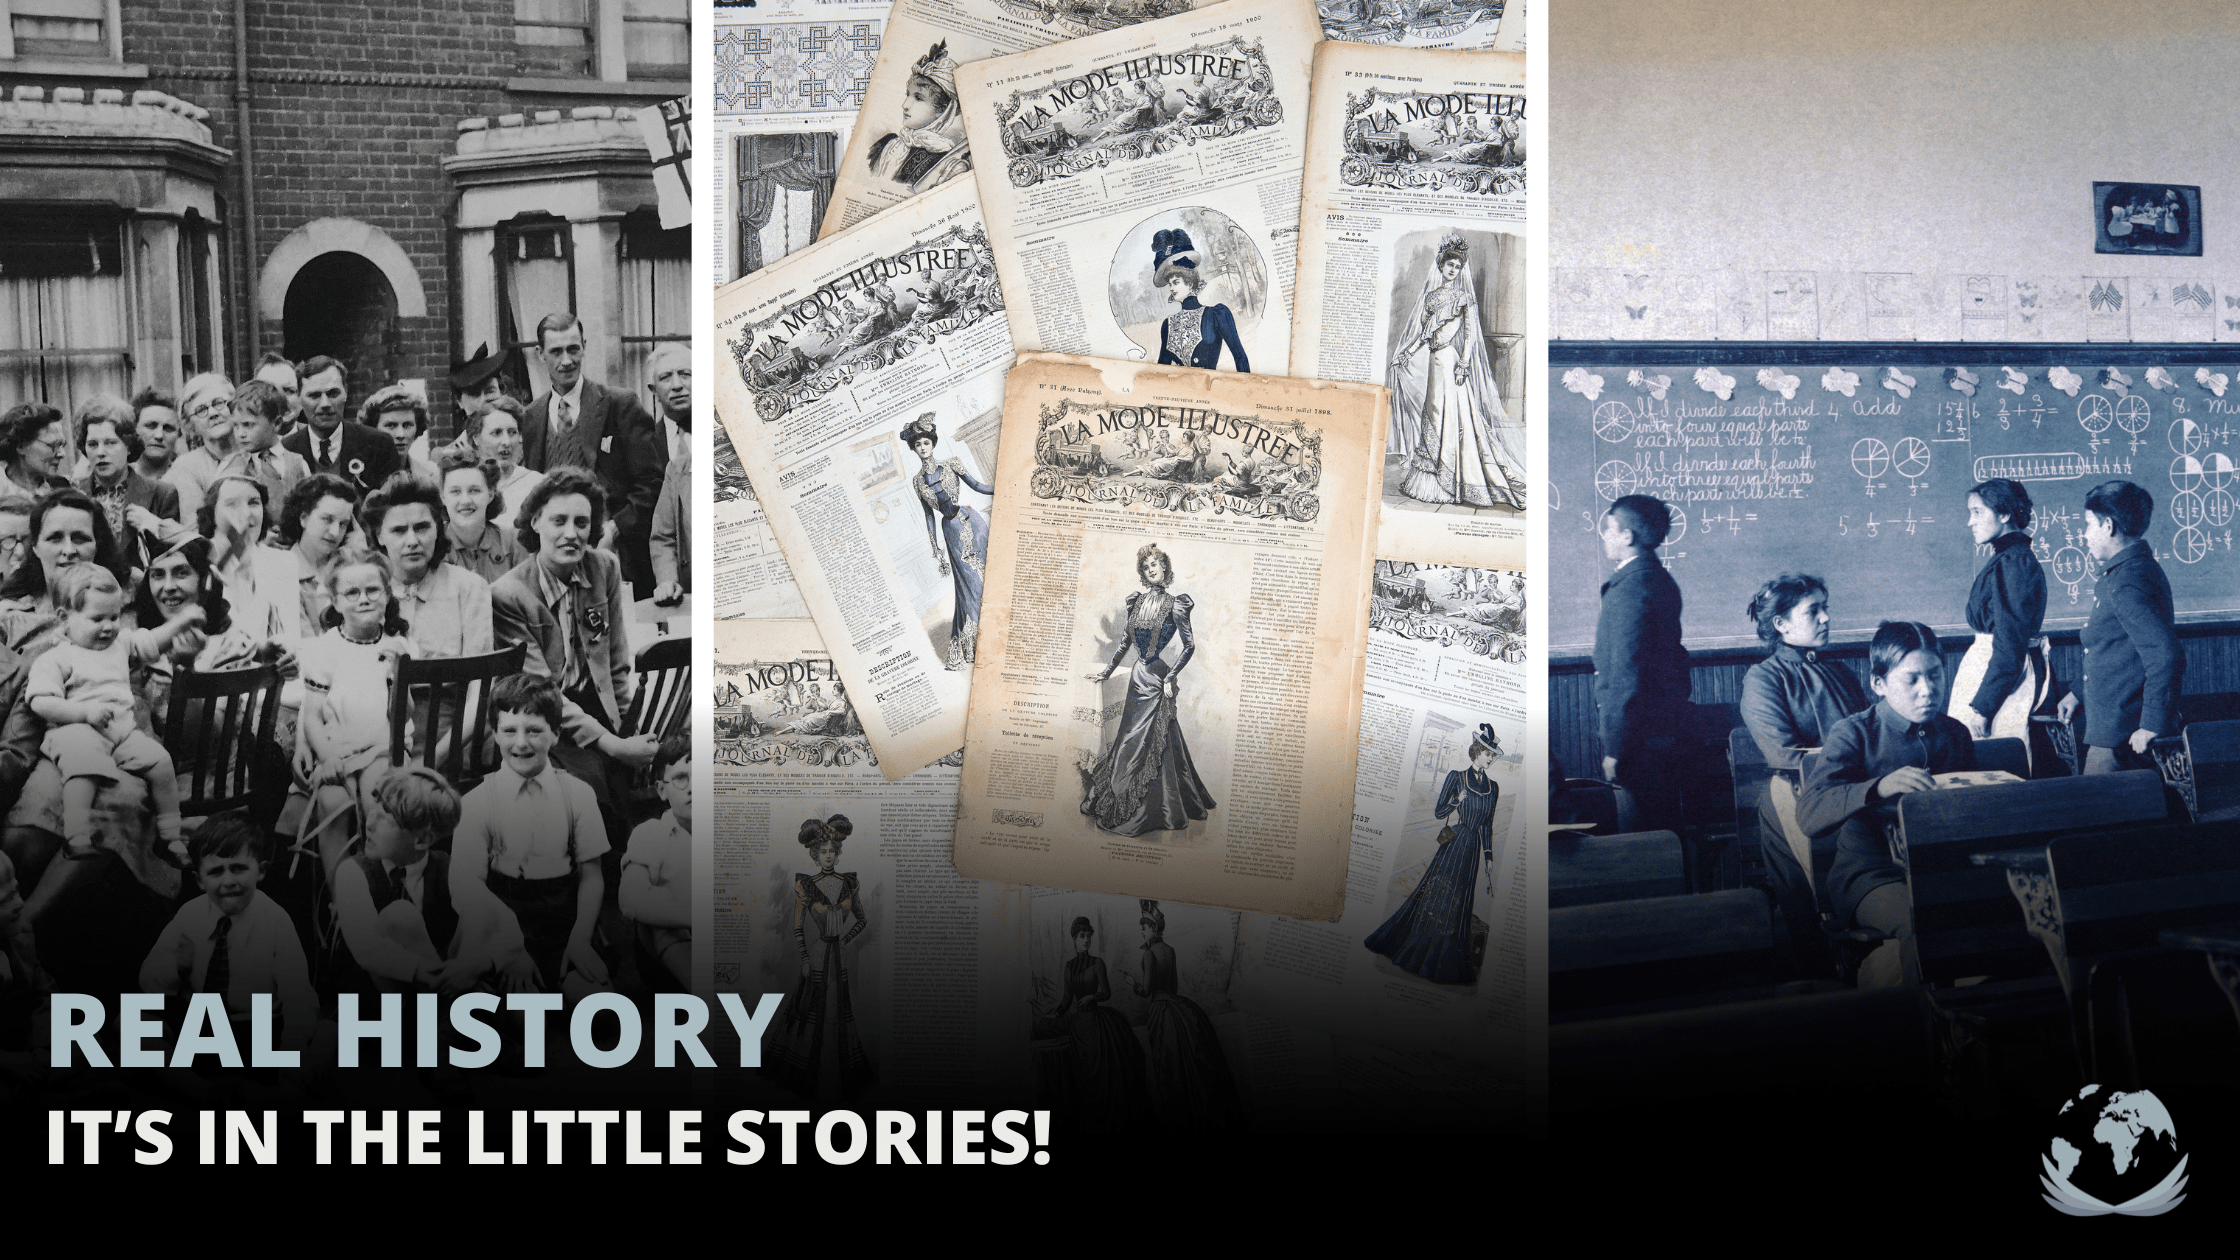 Real History is in Little Stories